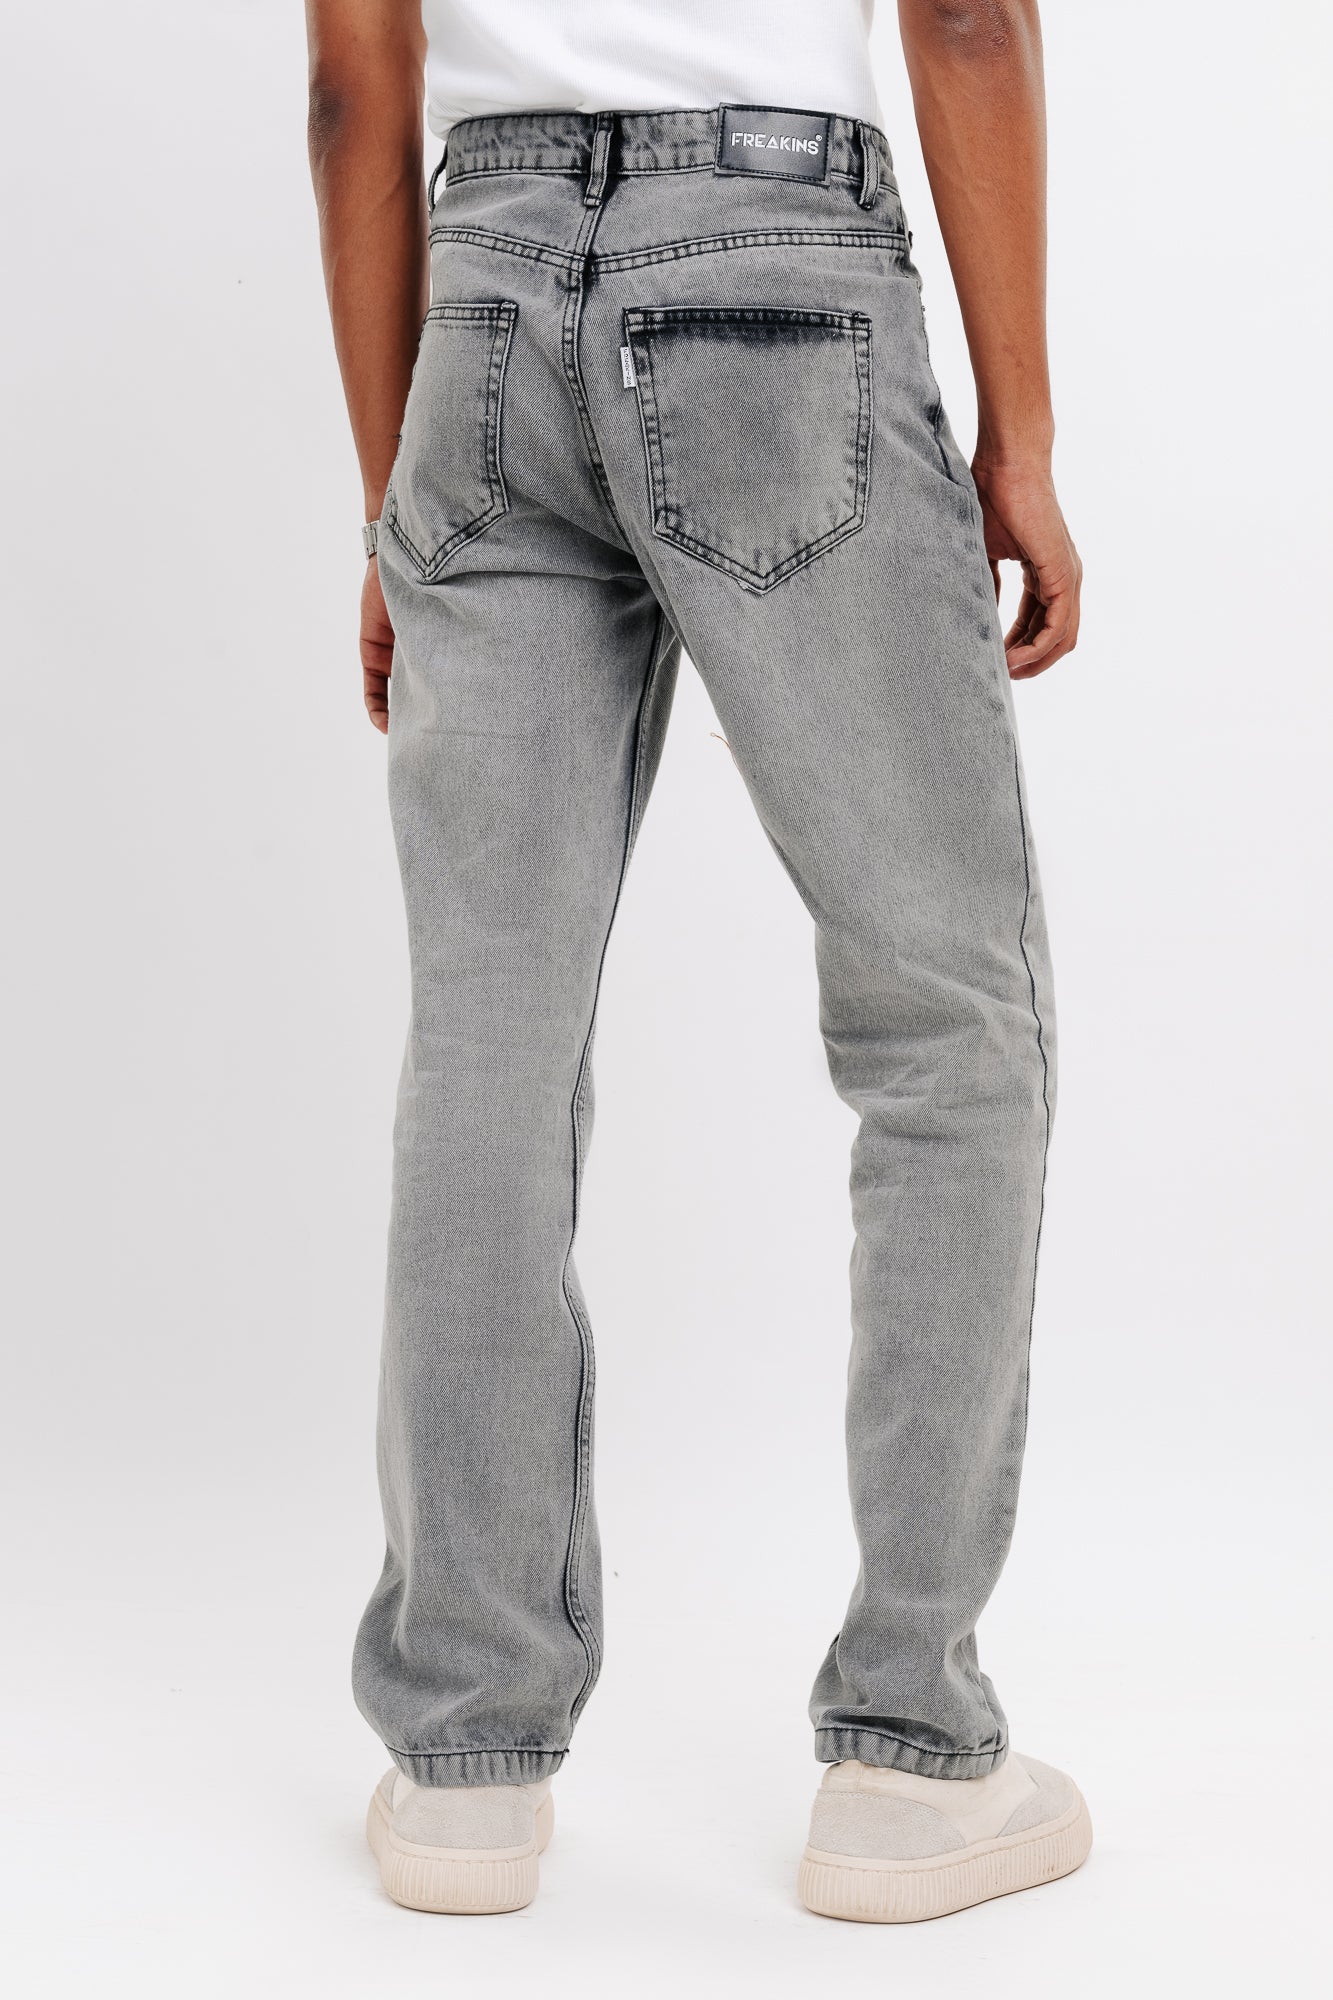 CHARCOAL MENS STRAIGHT JEANS